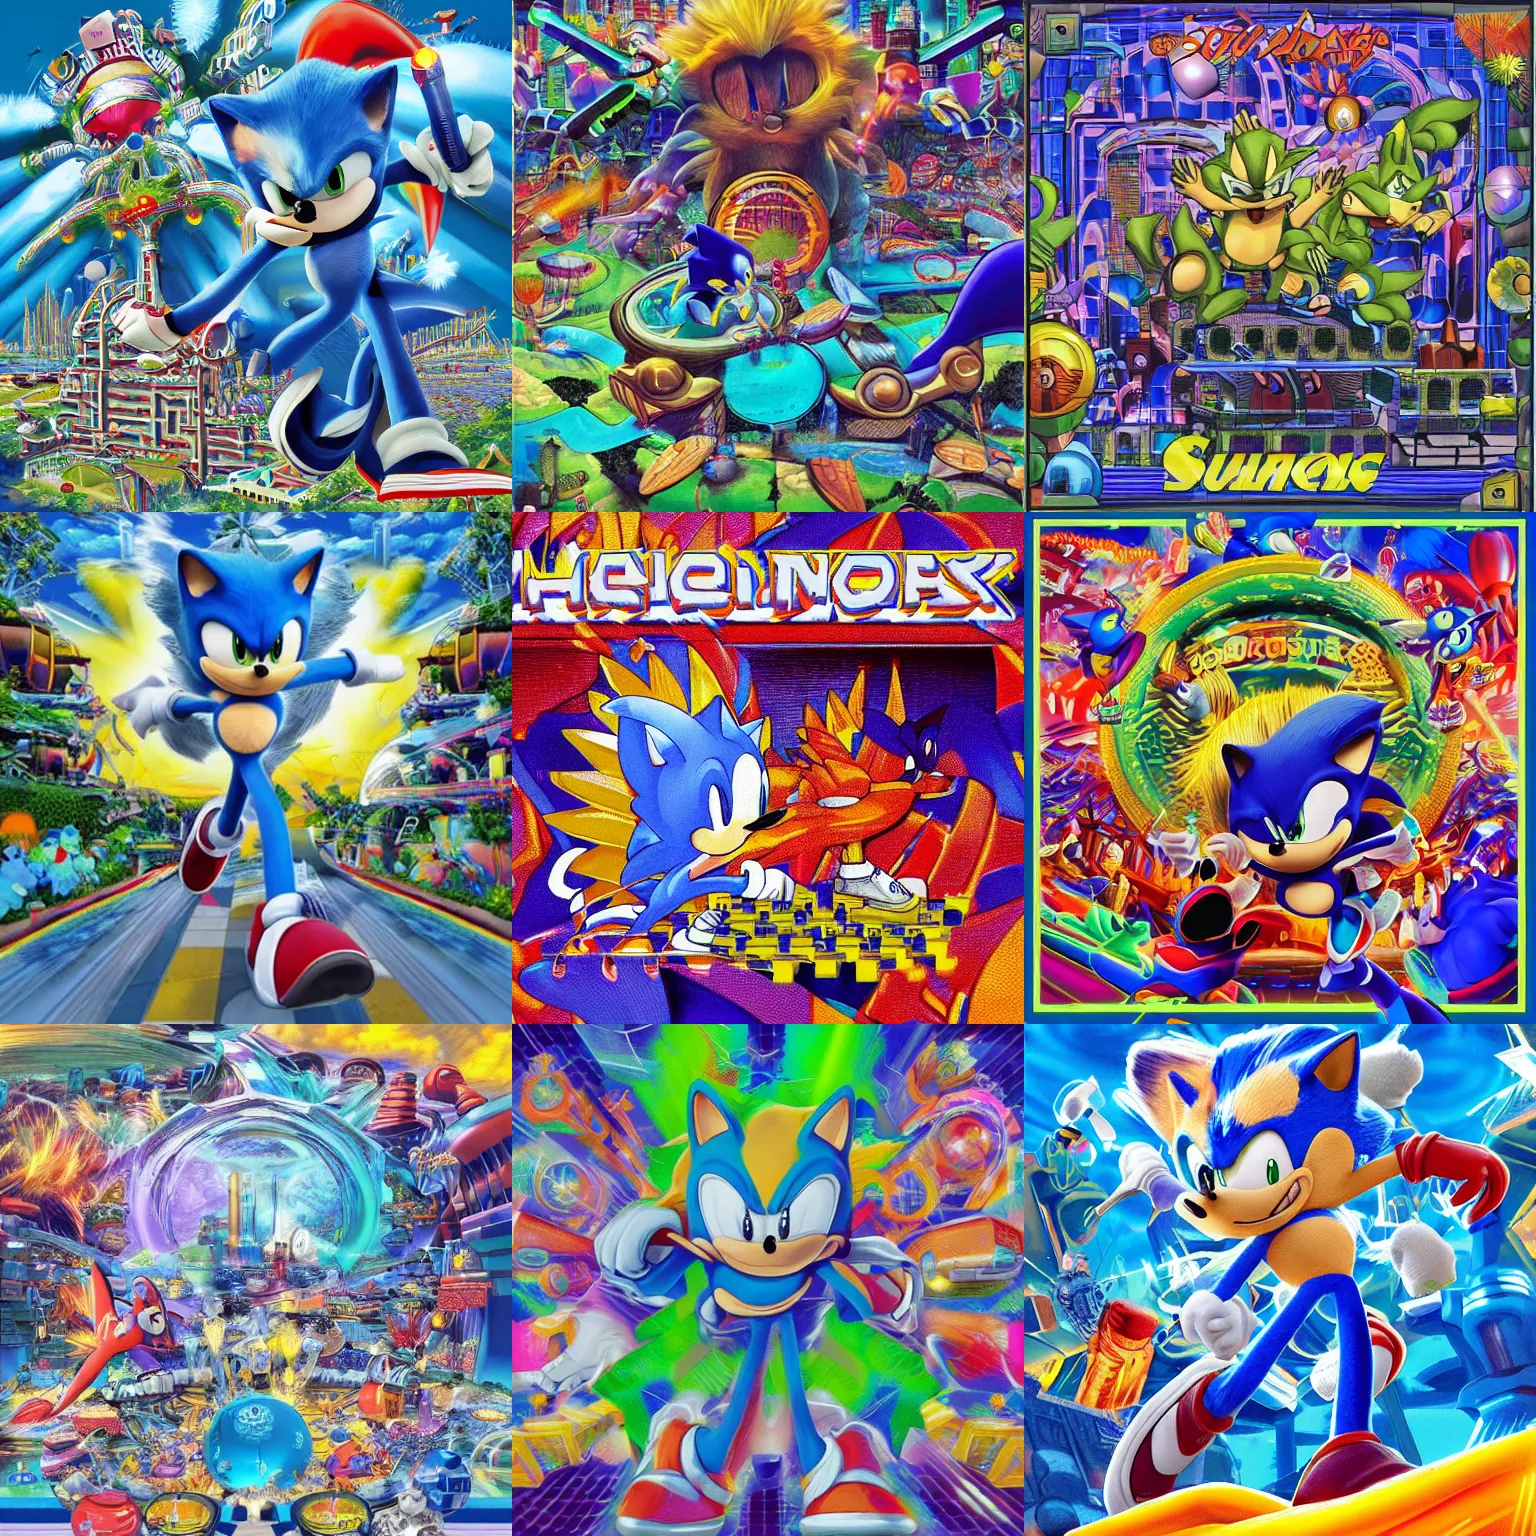 Prompt: sonic the hedgehog in a surreal, soft, shaded, professional, high quality airbrush art mgmt shpongle album cover of a chrome dissolving LSD DMT blue sonic the hedgehog falling through a vaporwave sci-fi city, checkerboard horizon, rings, 1990s 1992 Sega Genesis video game album cover